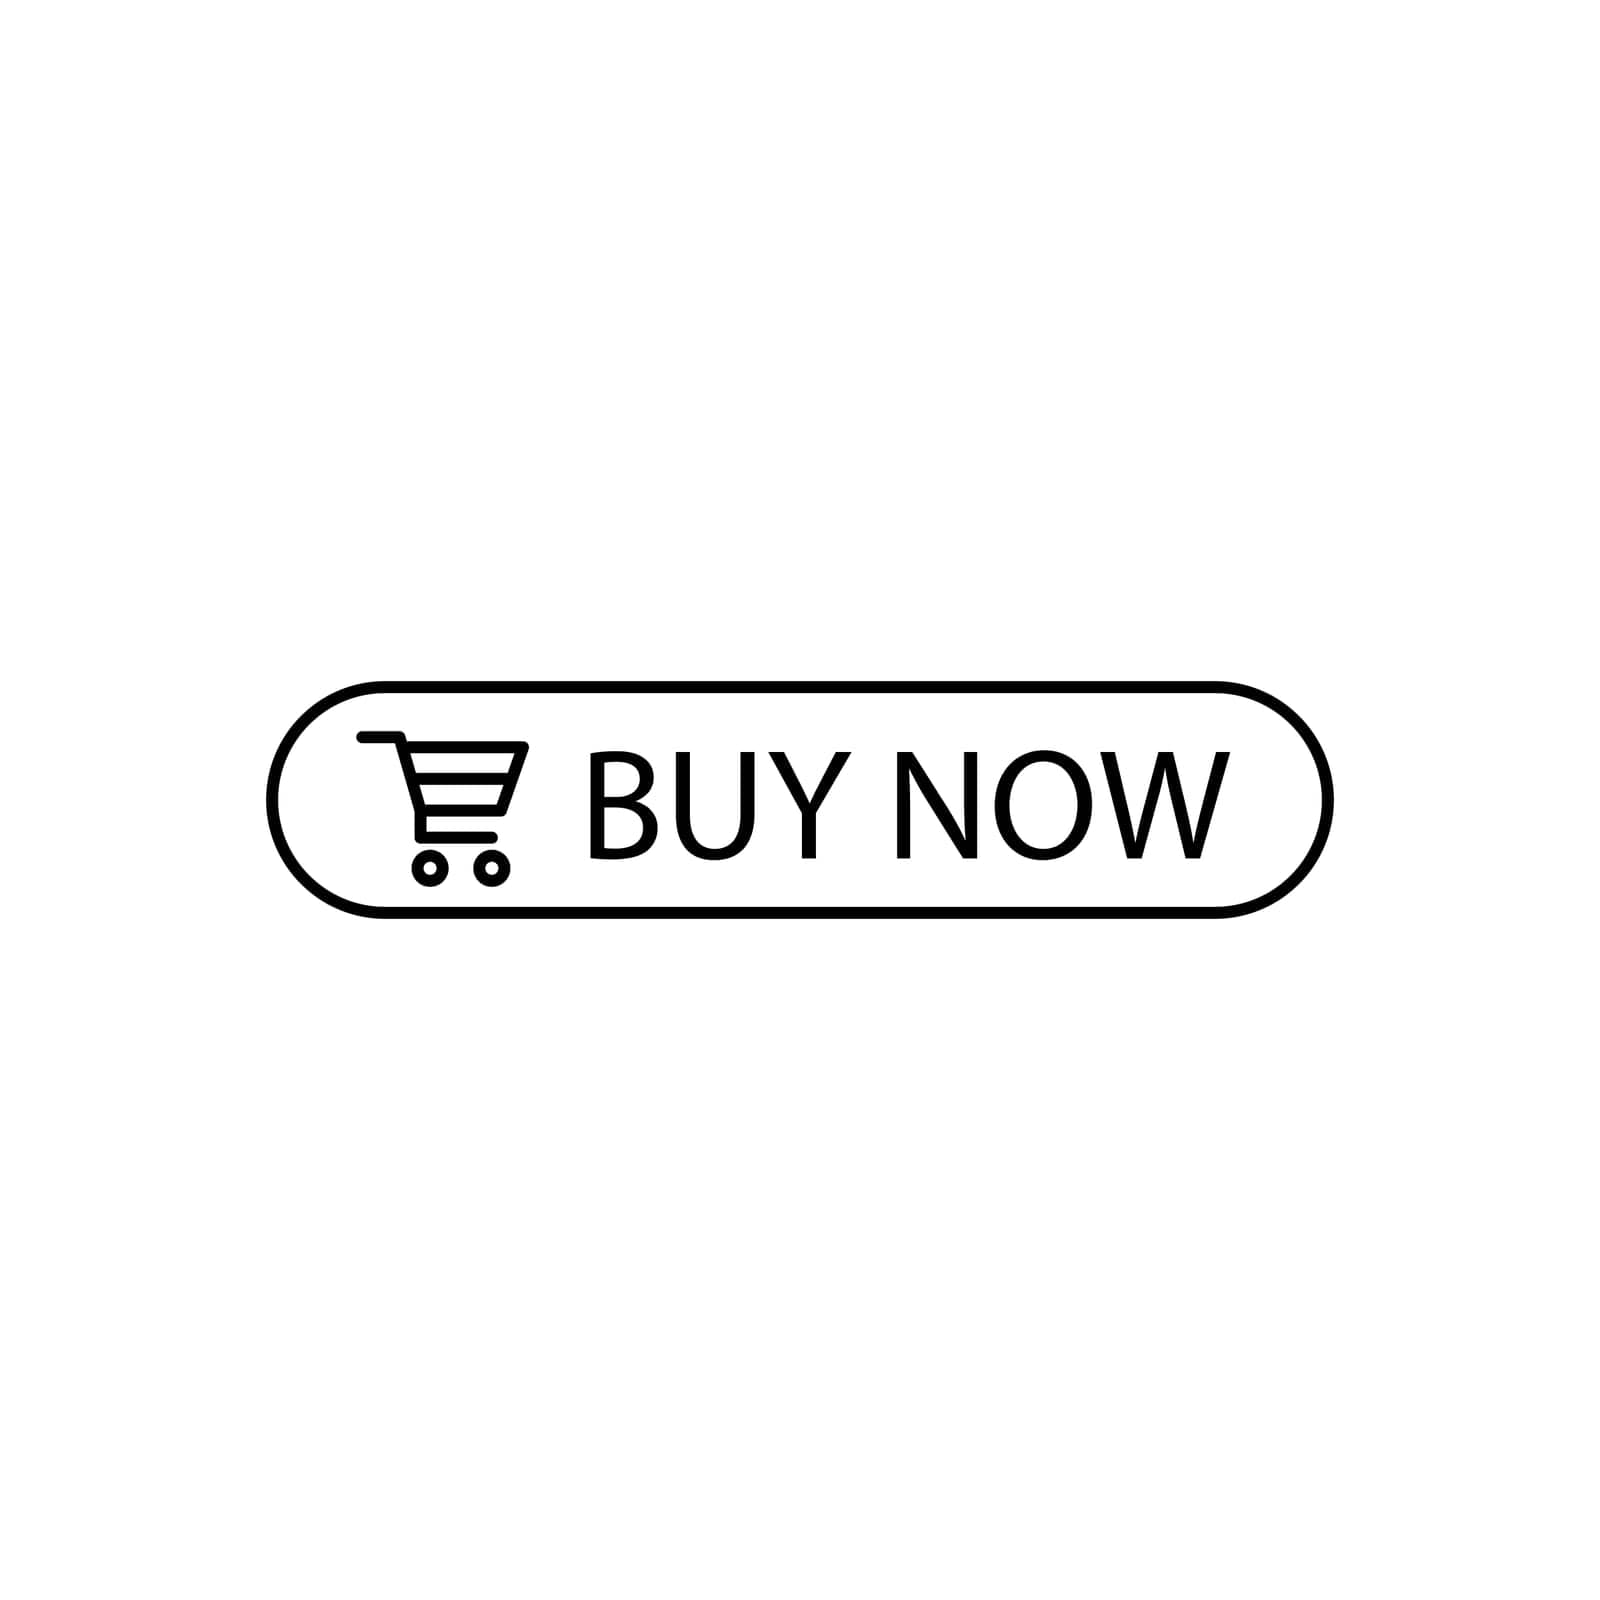 Buy now black simple button. Buy now sign button isolated. Shopping sign.